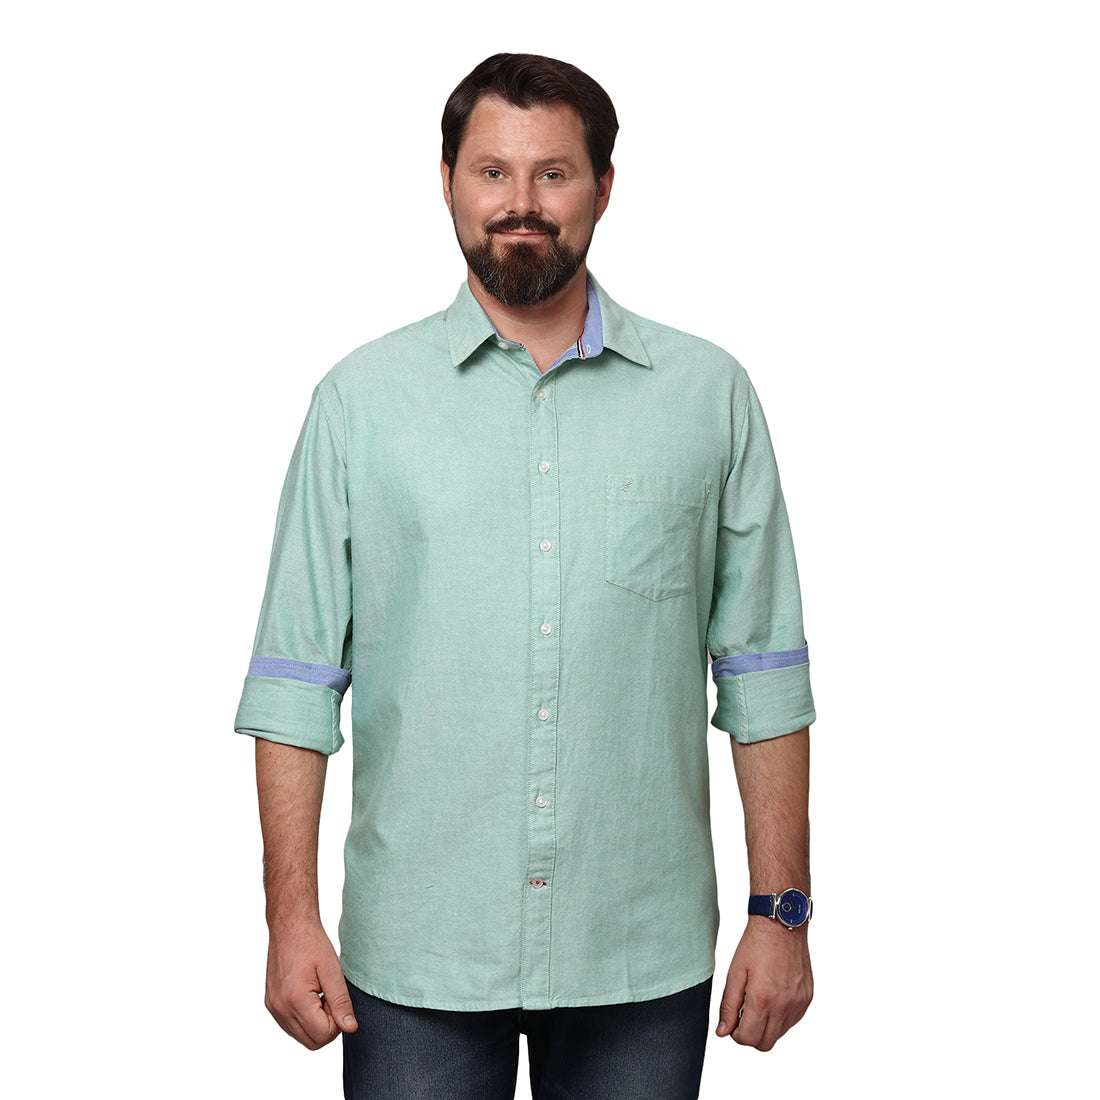 Big & Bold Solid Green Full Sleeves Slim Fit Casual Shirts (Plus Size) - Double Two